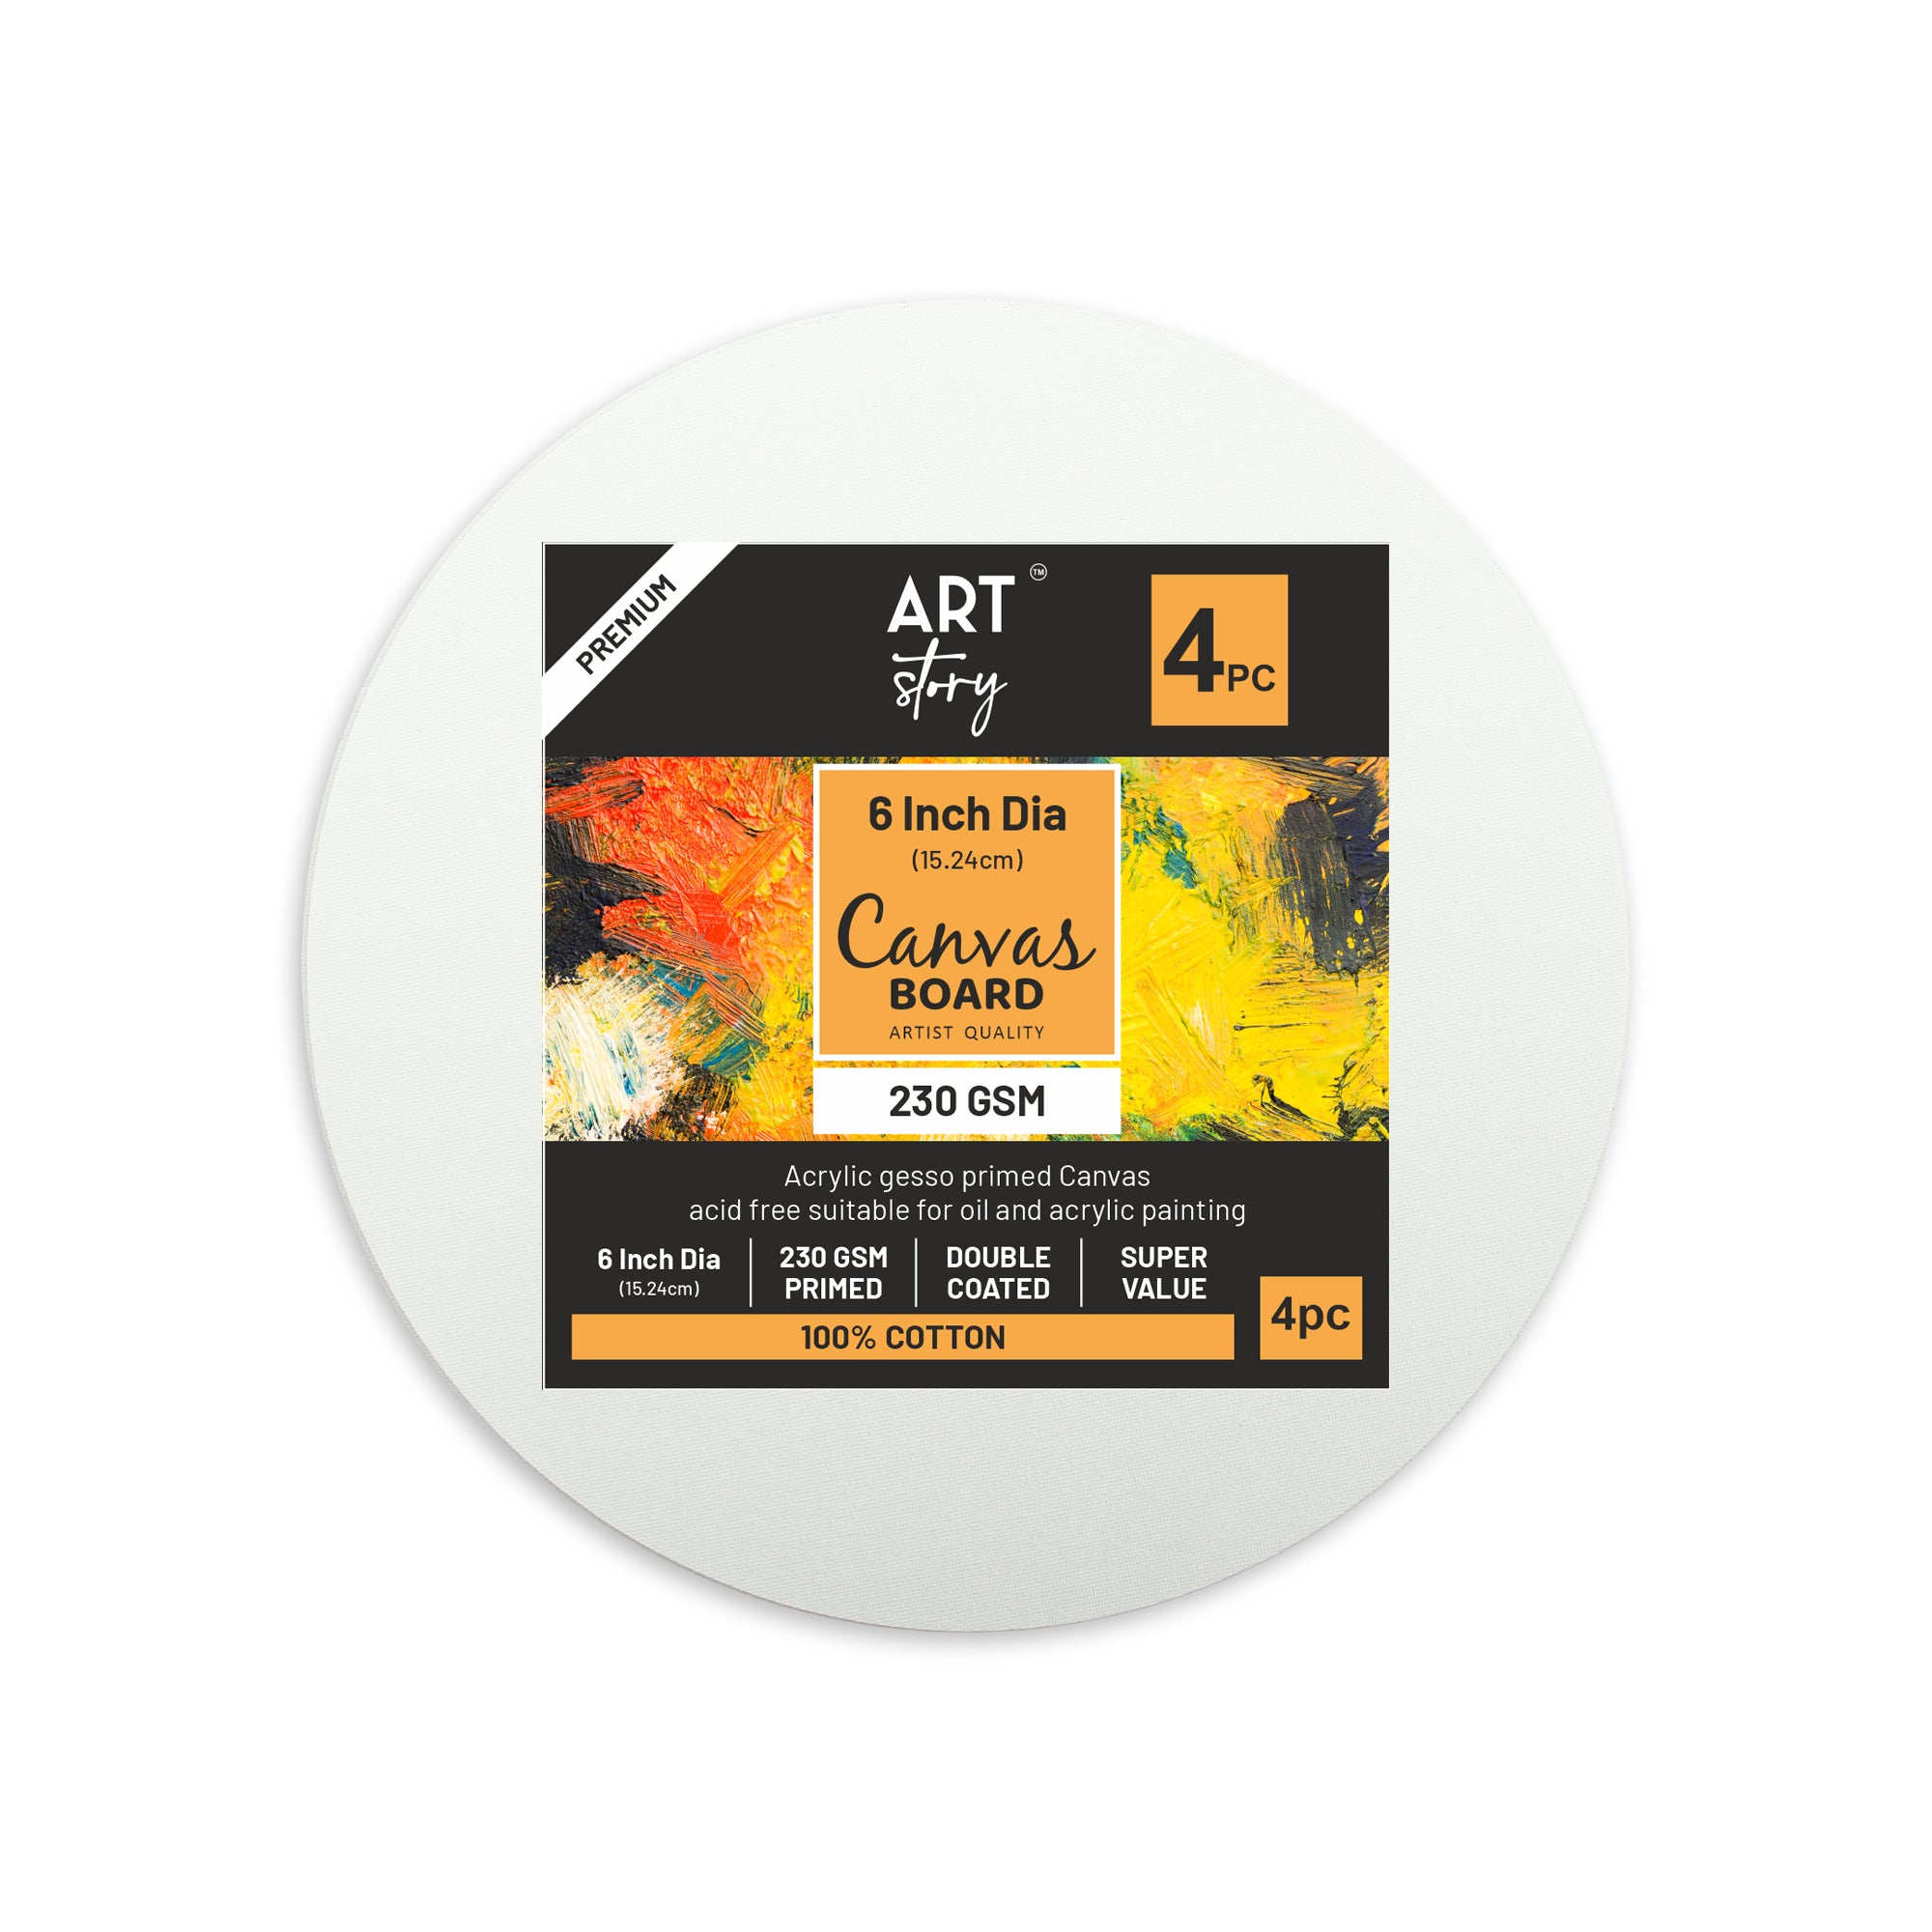 Canvas Board Round 6Inch Dia 230Gsm 2Mm Thick 4Pc Shrink Lb